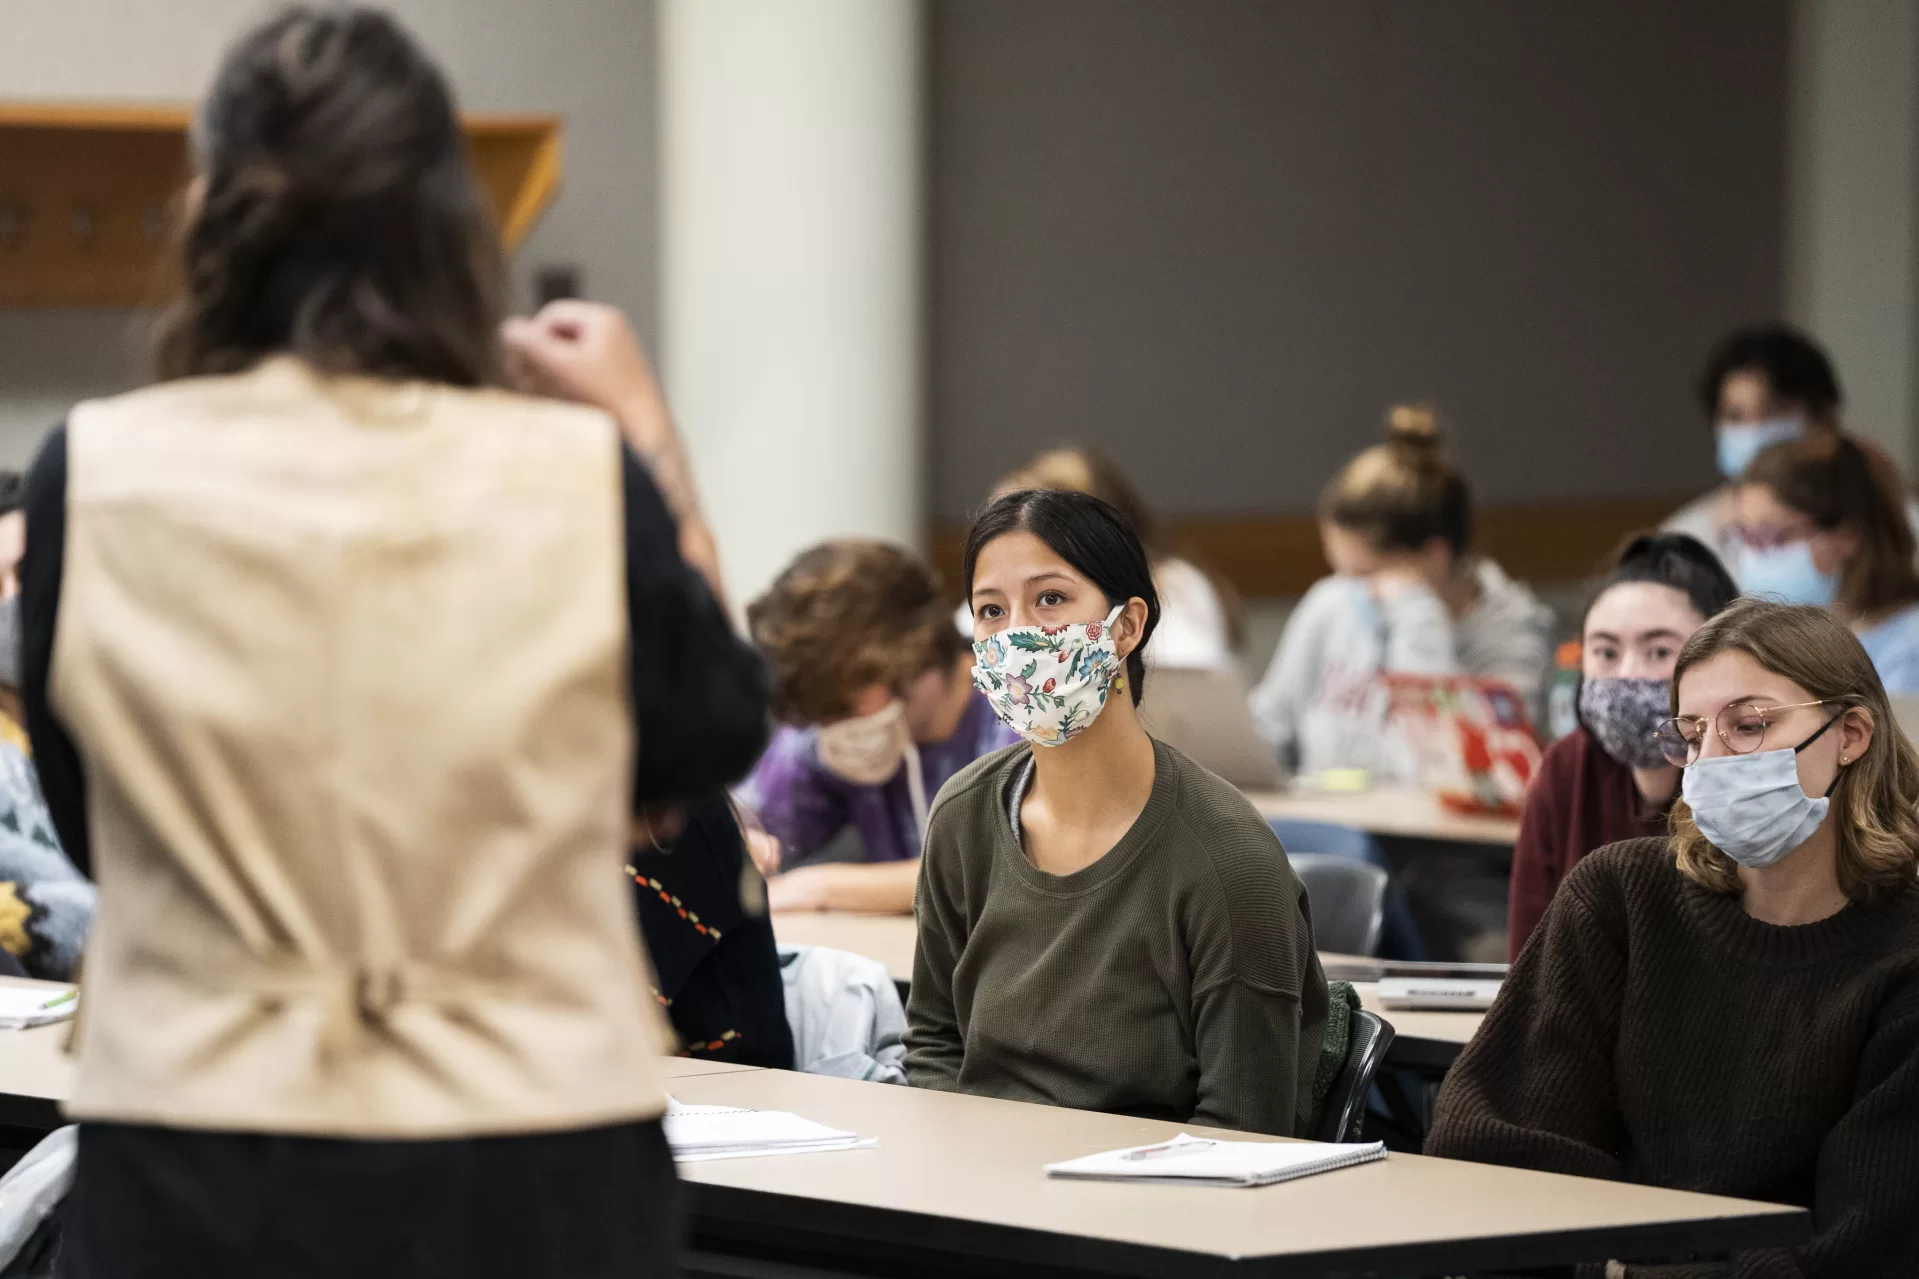 Madeleine Lee ’24 of Providence RI, reacts while asking a question to speaker Winona LaDuke in Keck Classroom on October 26, 2021. (Theophil Syslo | Bates College)